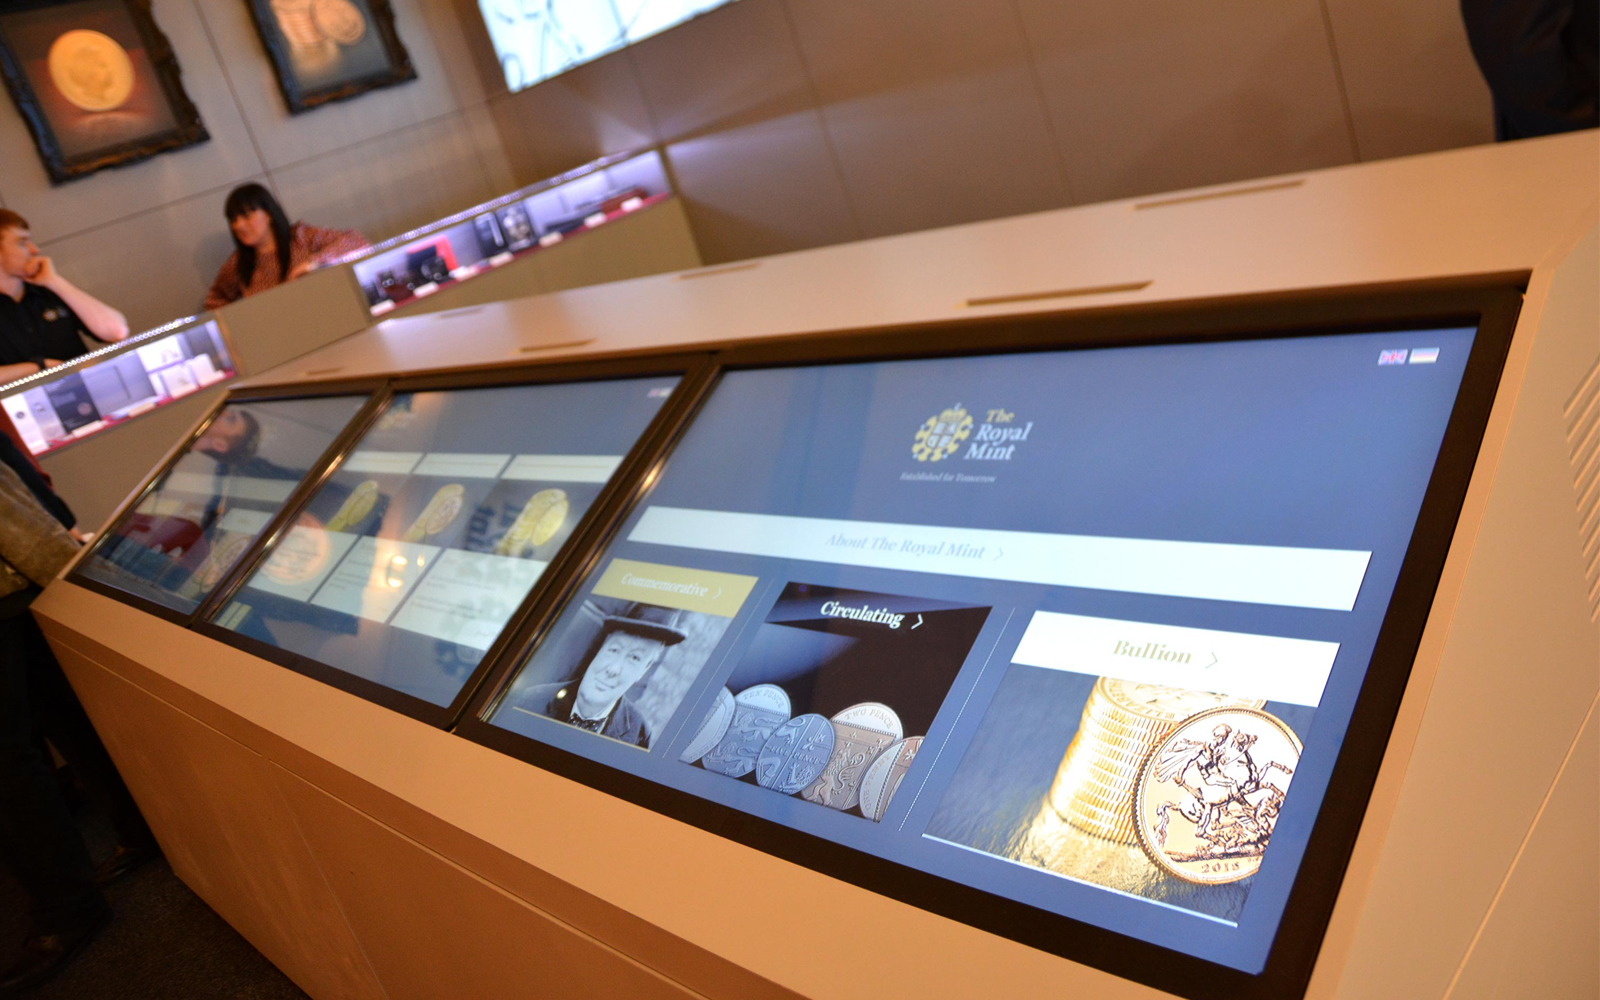 man and women interacting with The Royal Mint interactive touchscreen display software shown on large monitors